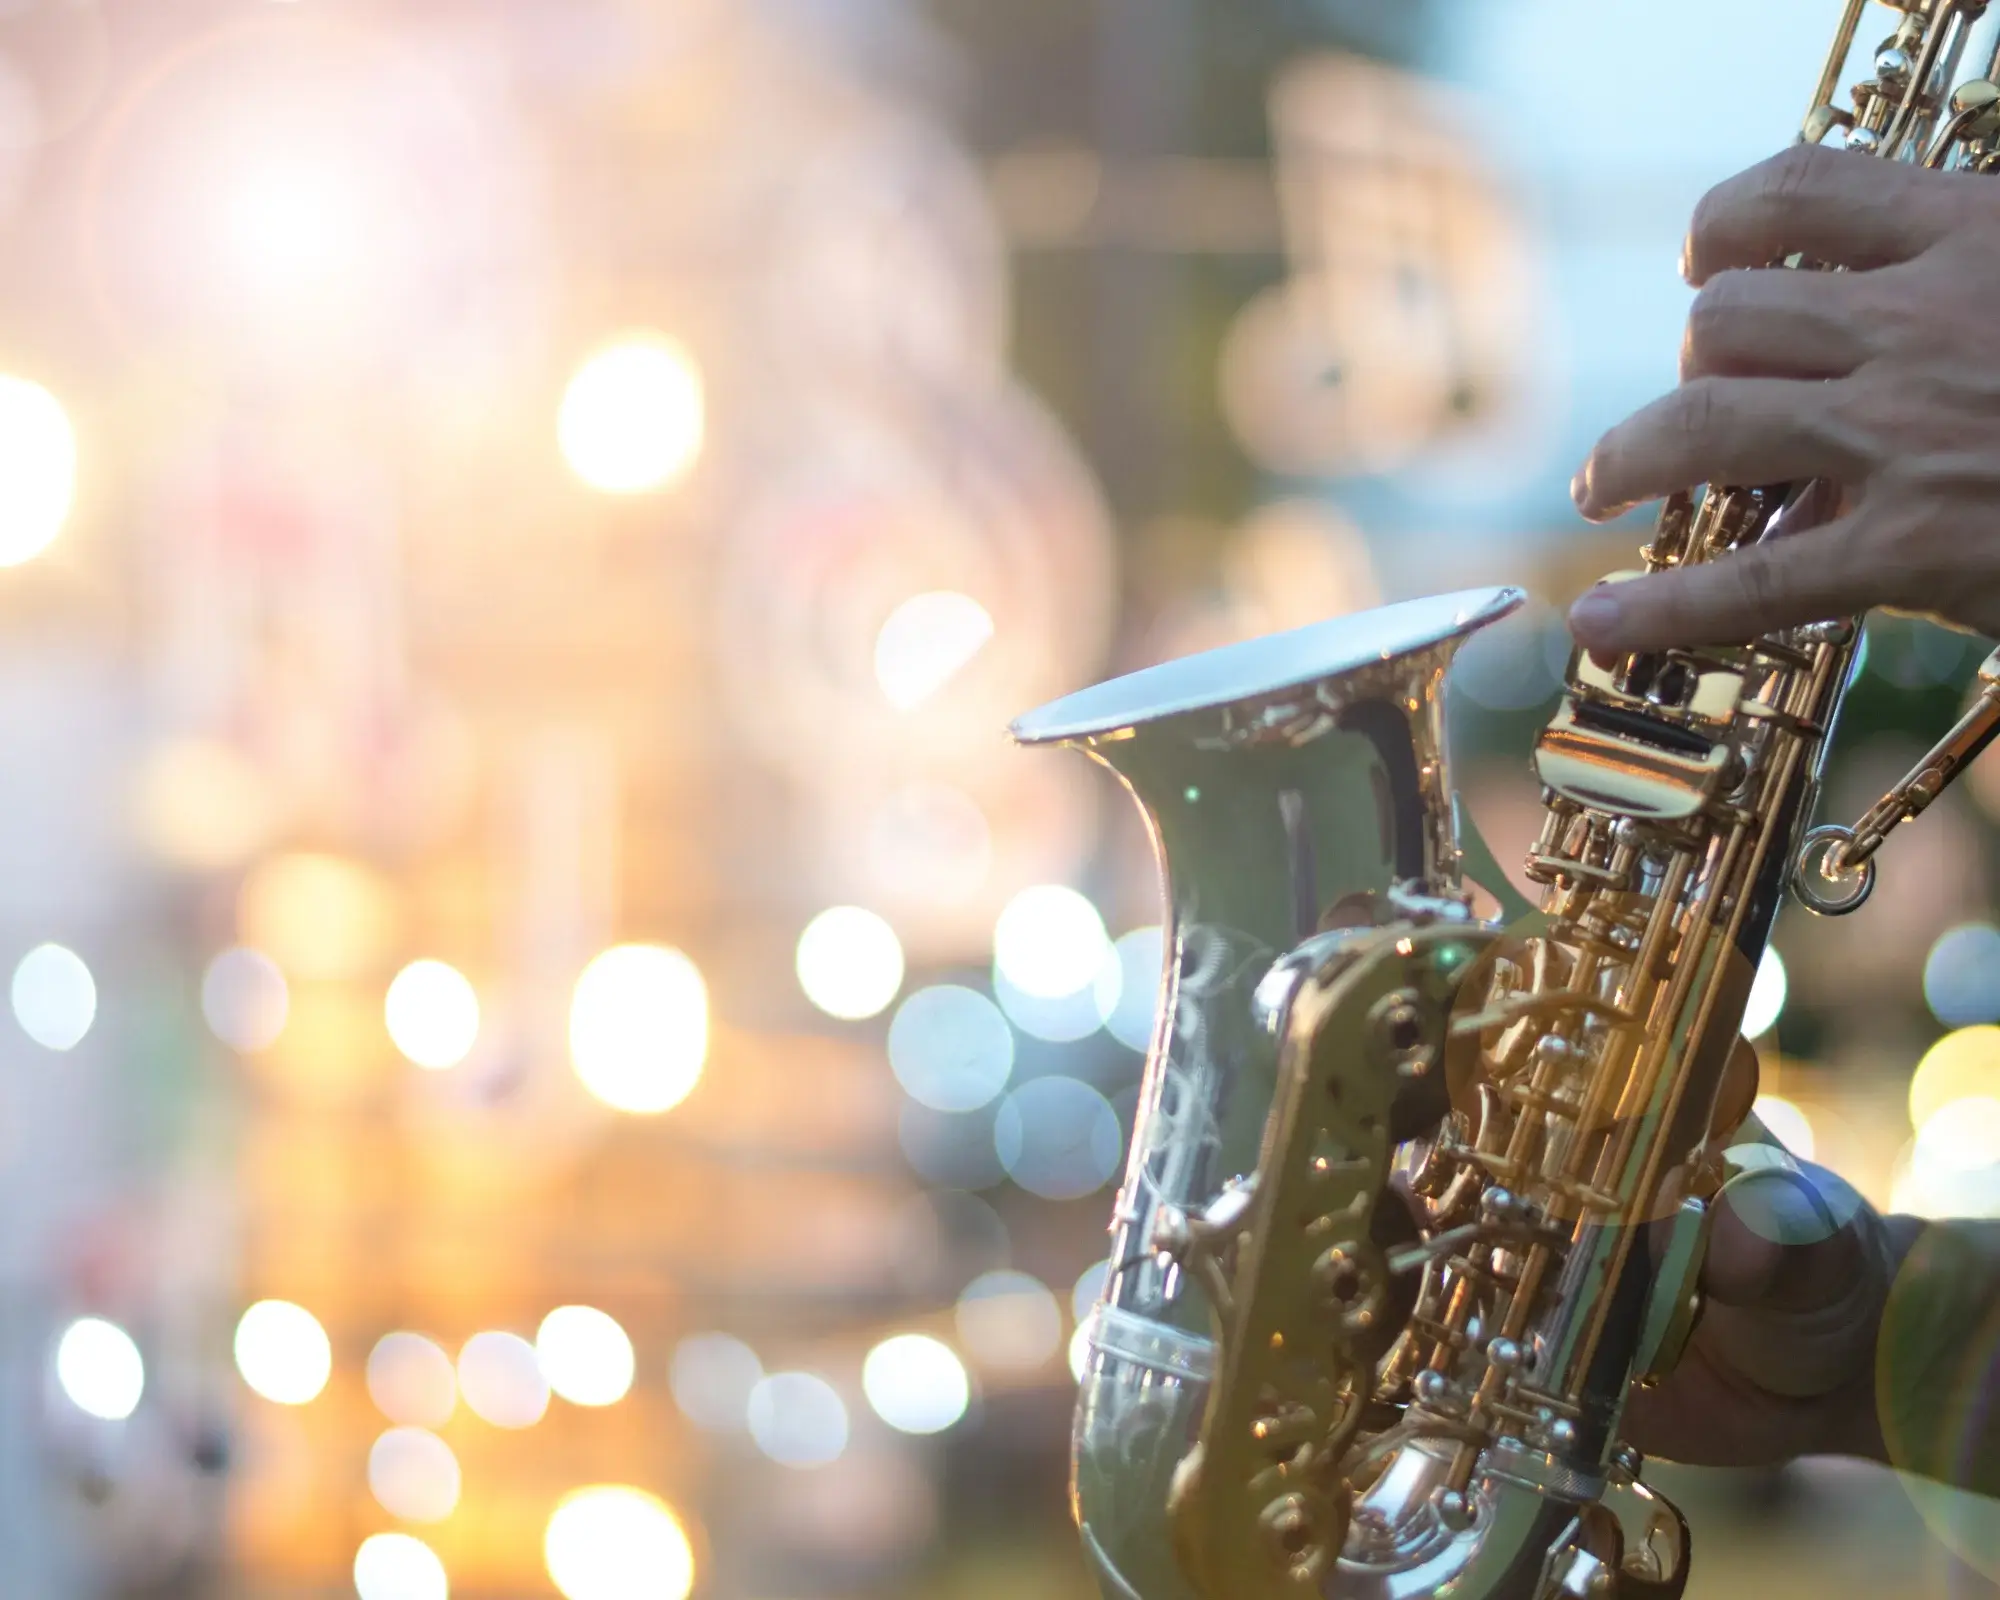 A person playing the saxophone in front of lights.